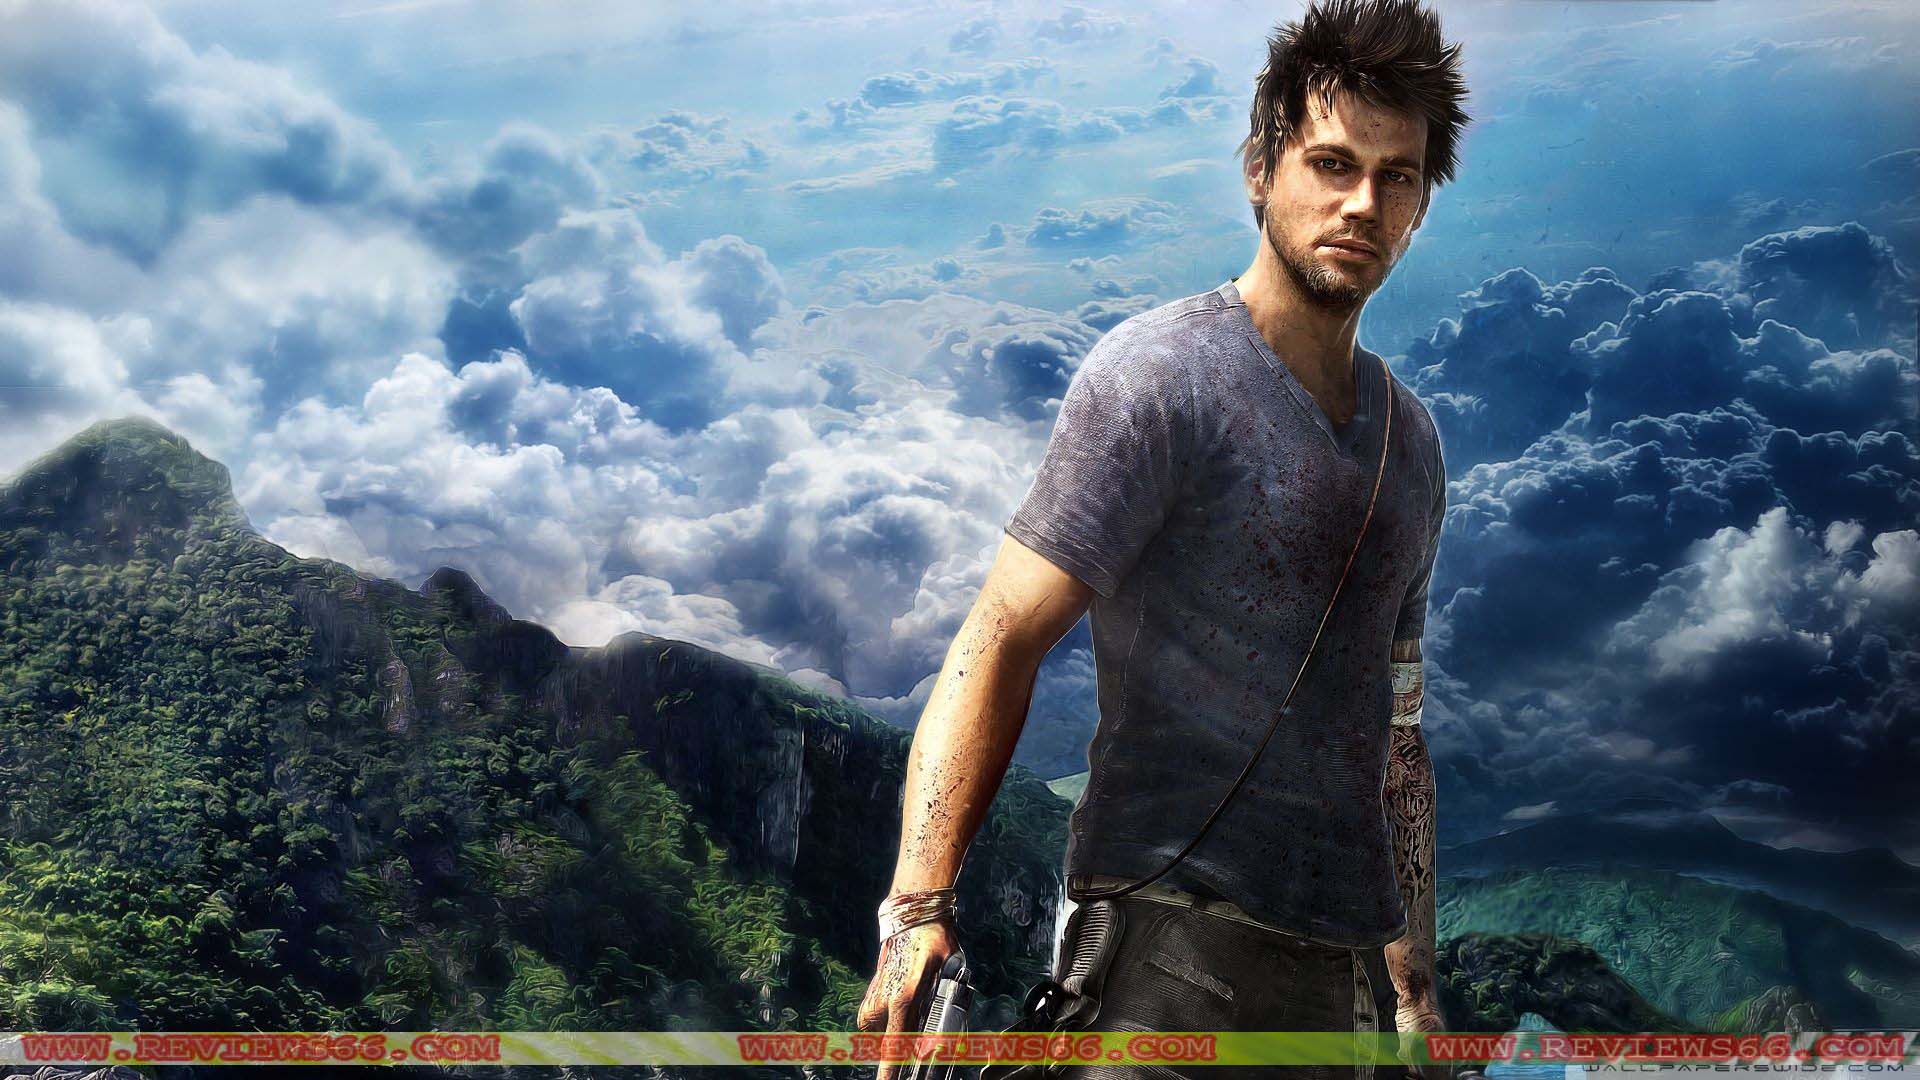 Far Cry 3 Wallpapers HD Latest Wide Screen Wallpapers 1920x1080